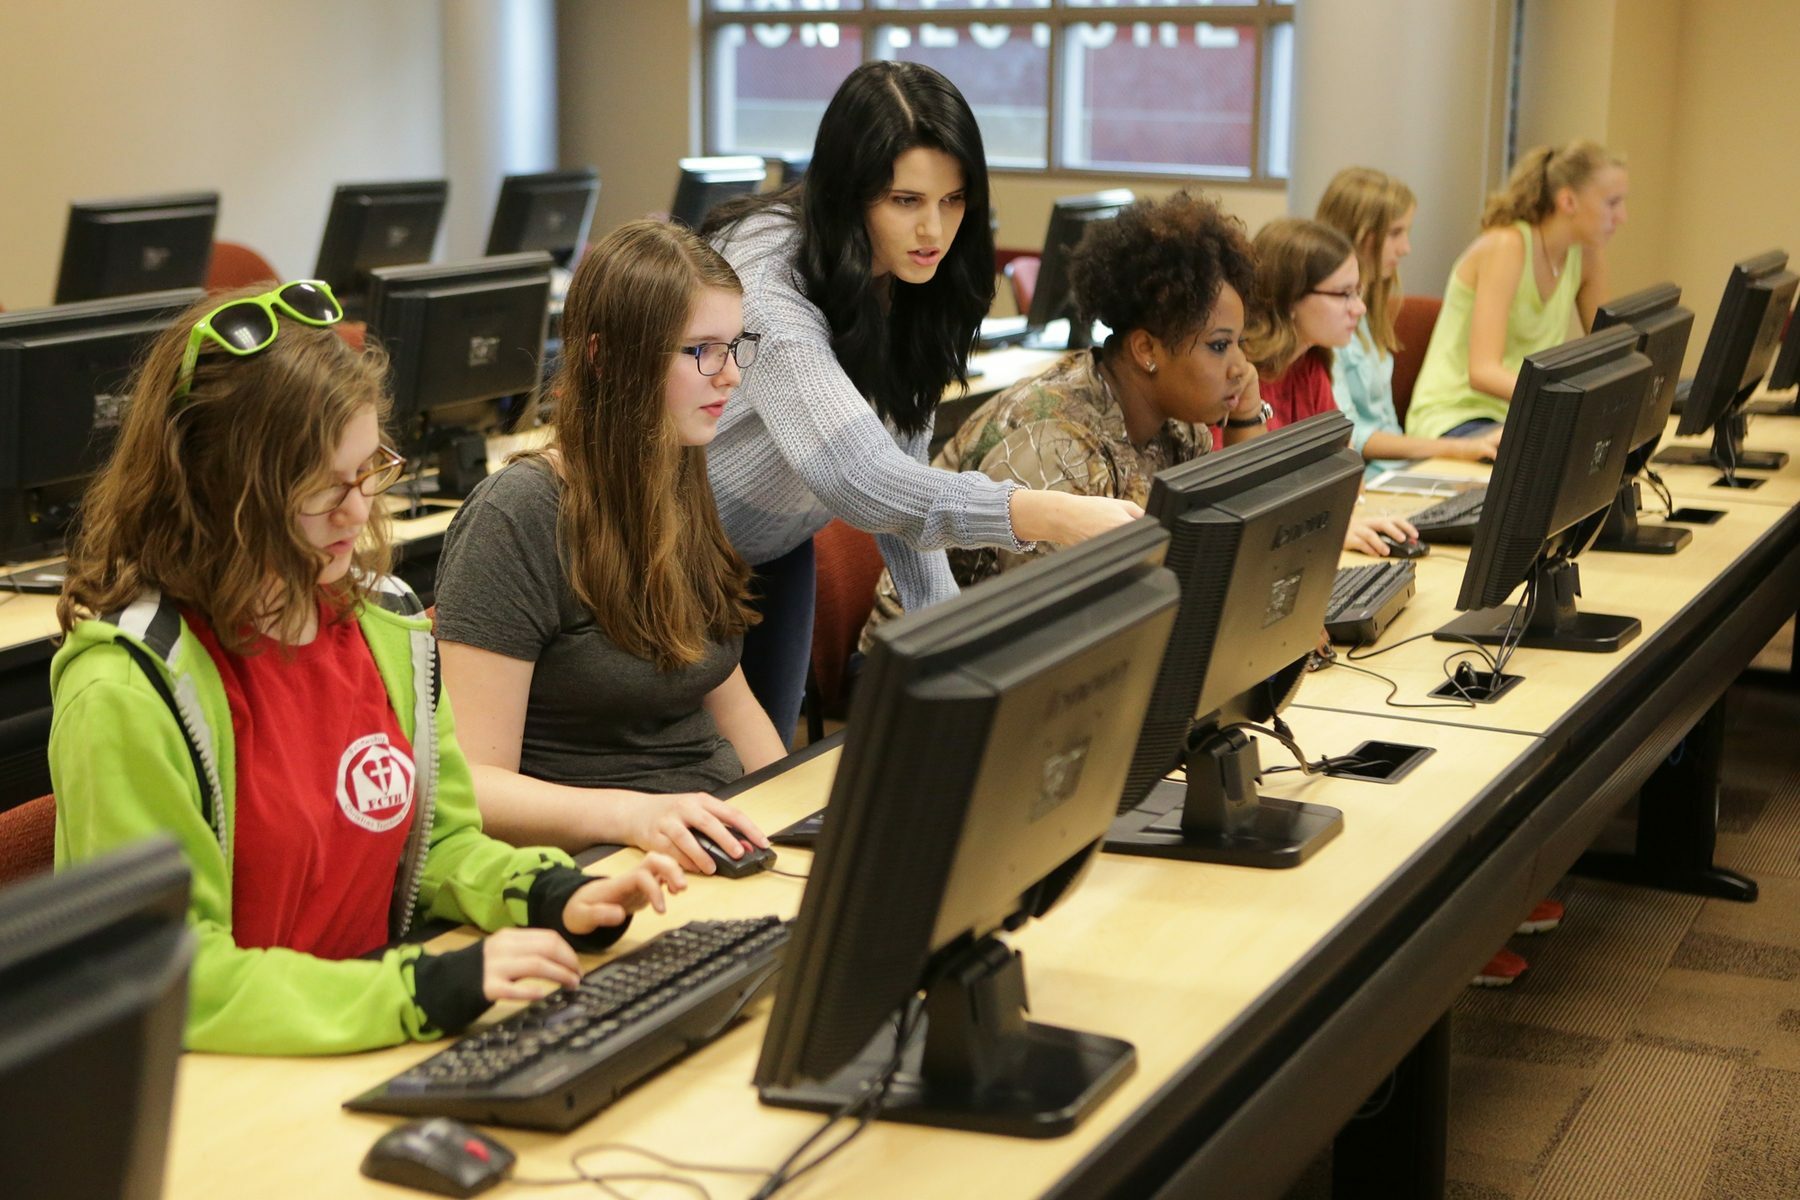 A woman stands and teaches students in a room full of computers.